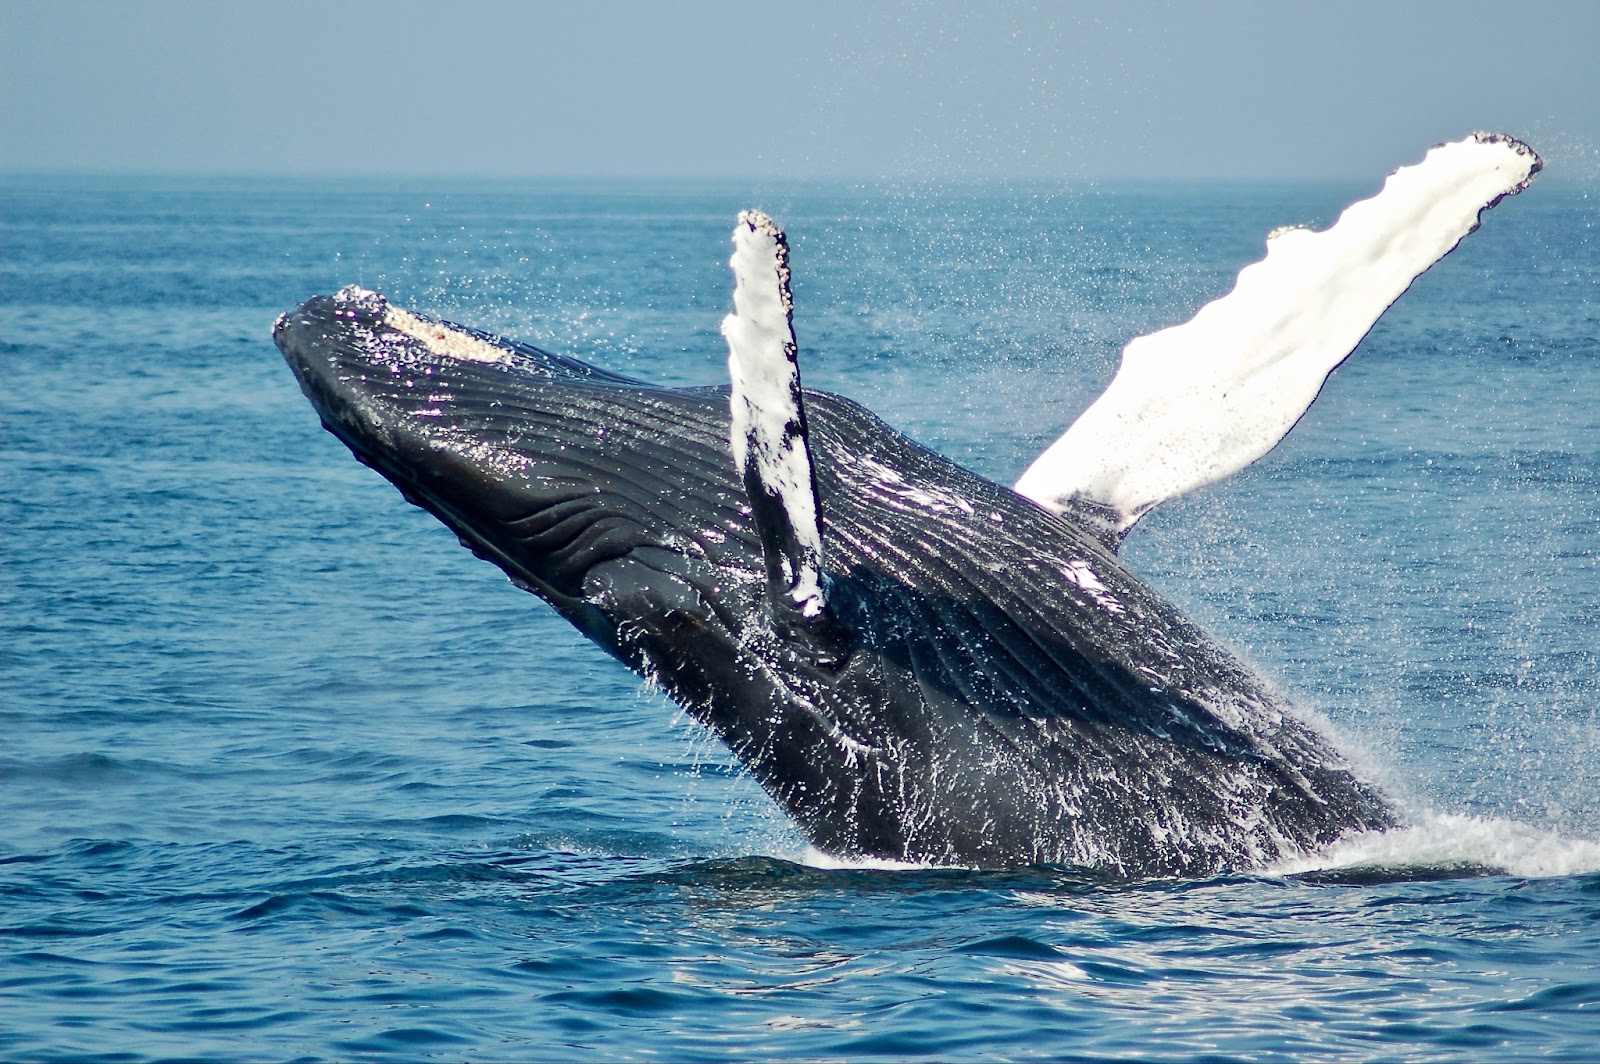 Majestic humpback whale breaching during whale watching in Hawaii.